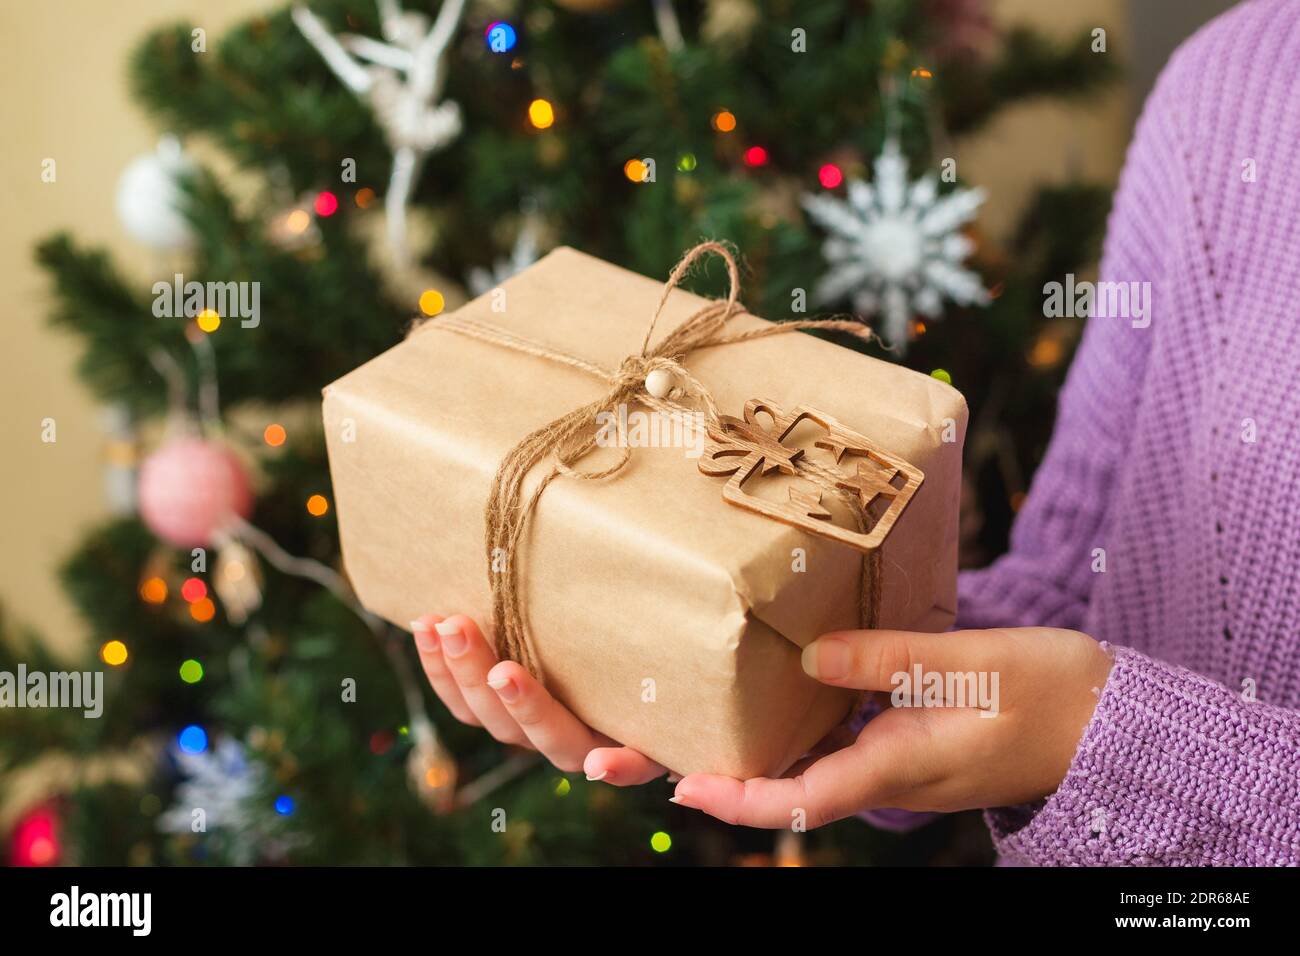 Womans hands holding nice present wrapped in craft paper, Christmas tree on background, zero waste concept Stock Photo